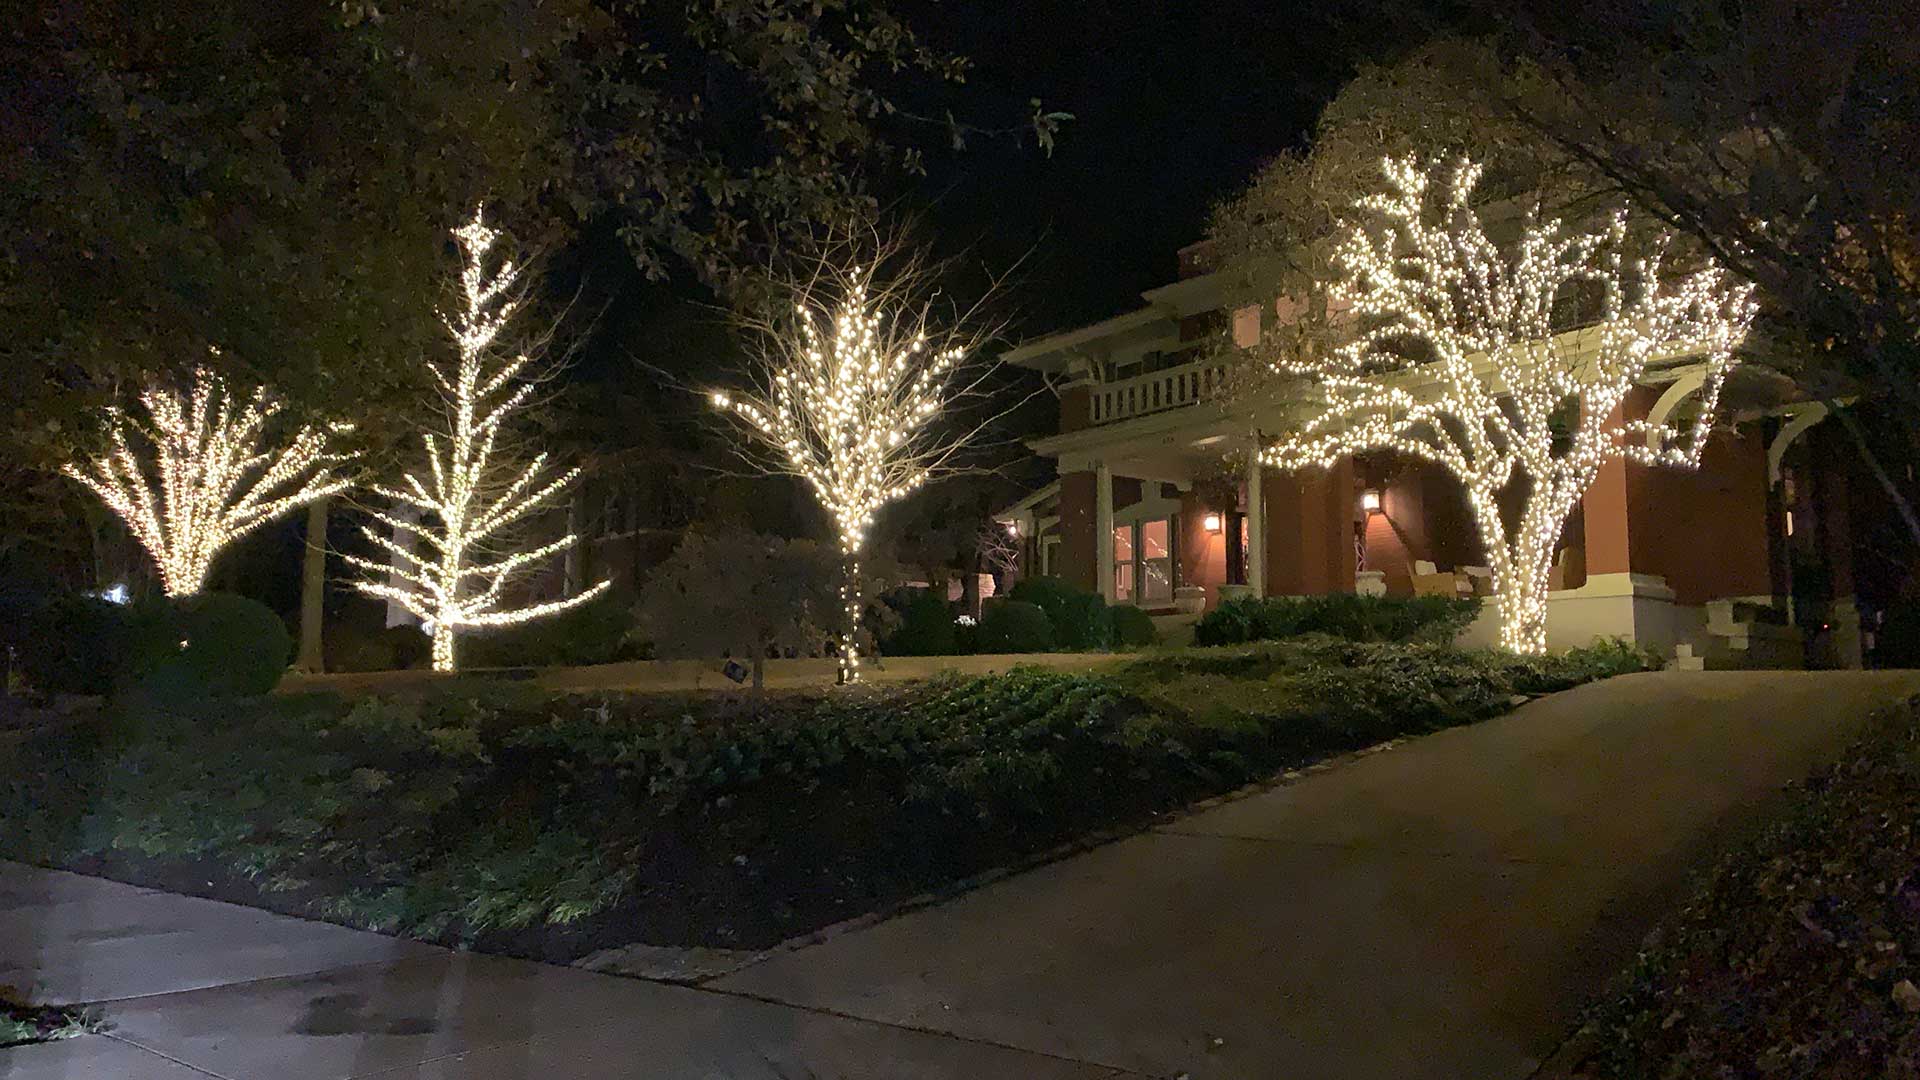 Holiday lighting installed on trees at a home in Bartlett, TN.